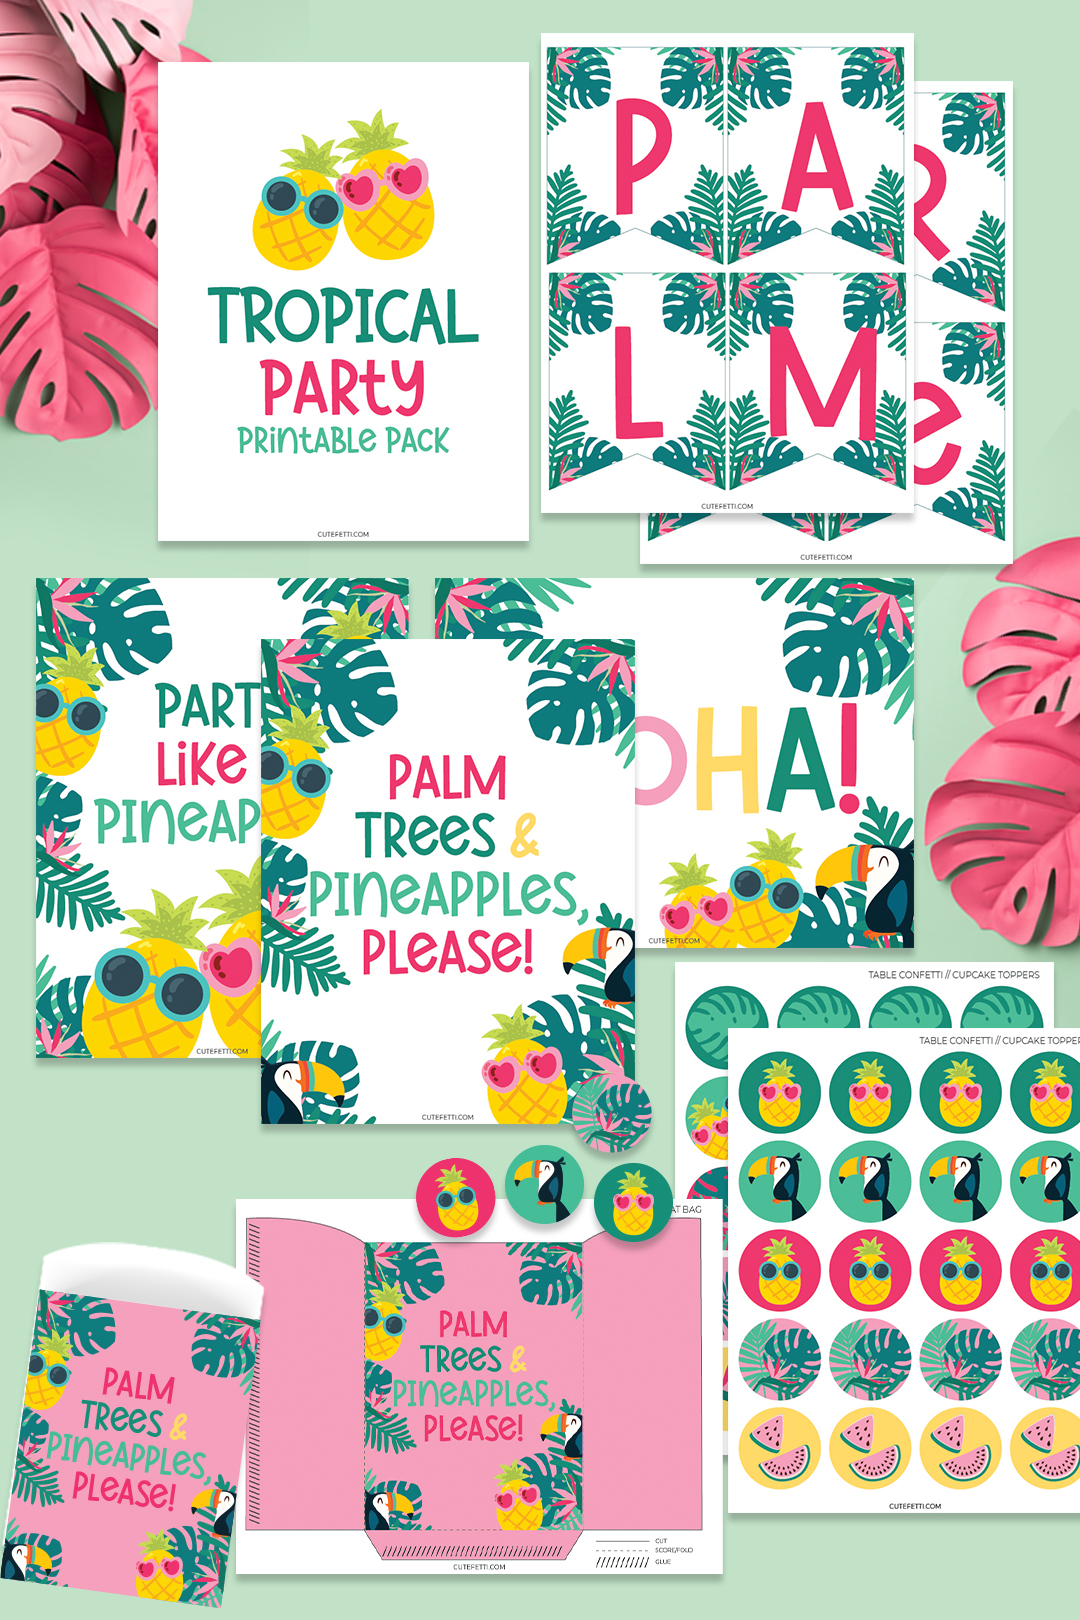 tropical party download promotional image